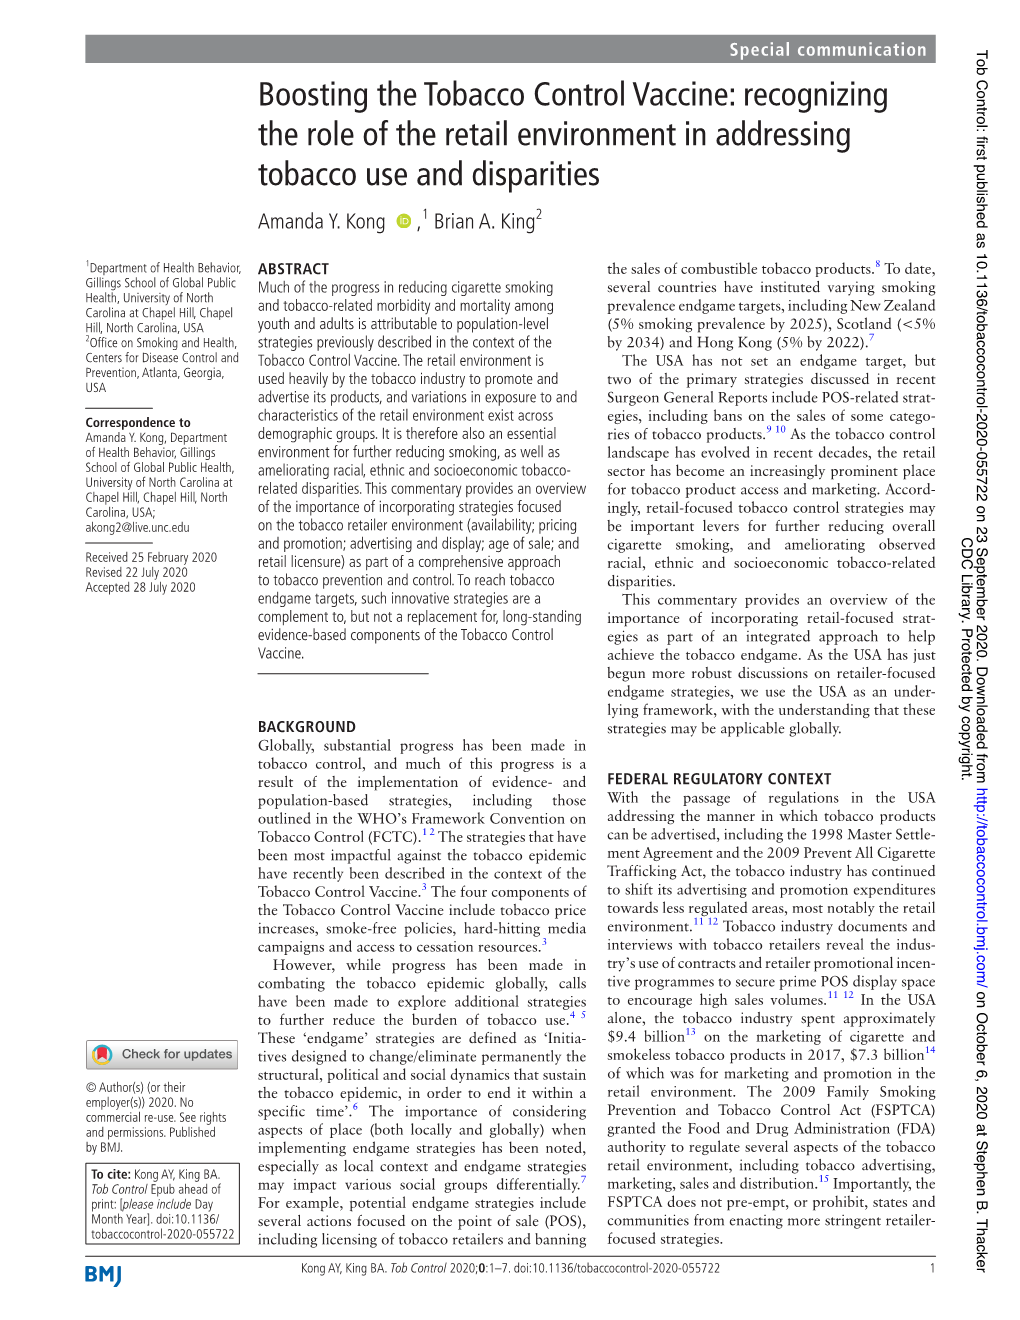 Boosting the Tobacco Control Vaccine: Recognizing the Role of the Retail Environment in Addressing Tobacco Use Anddisparities